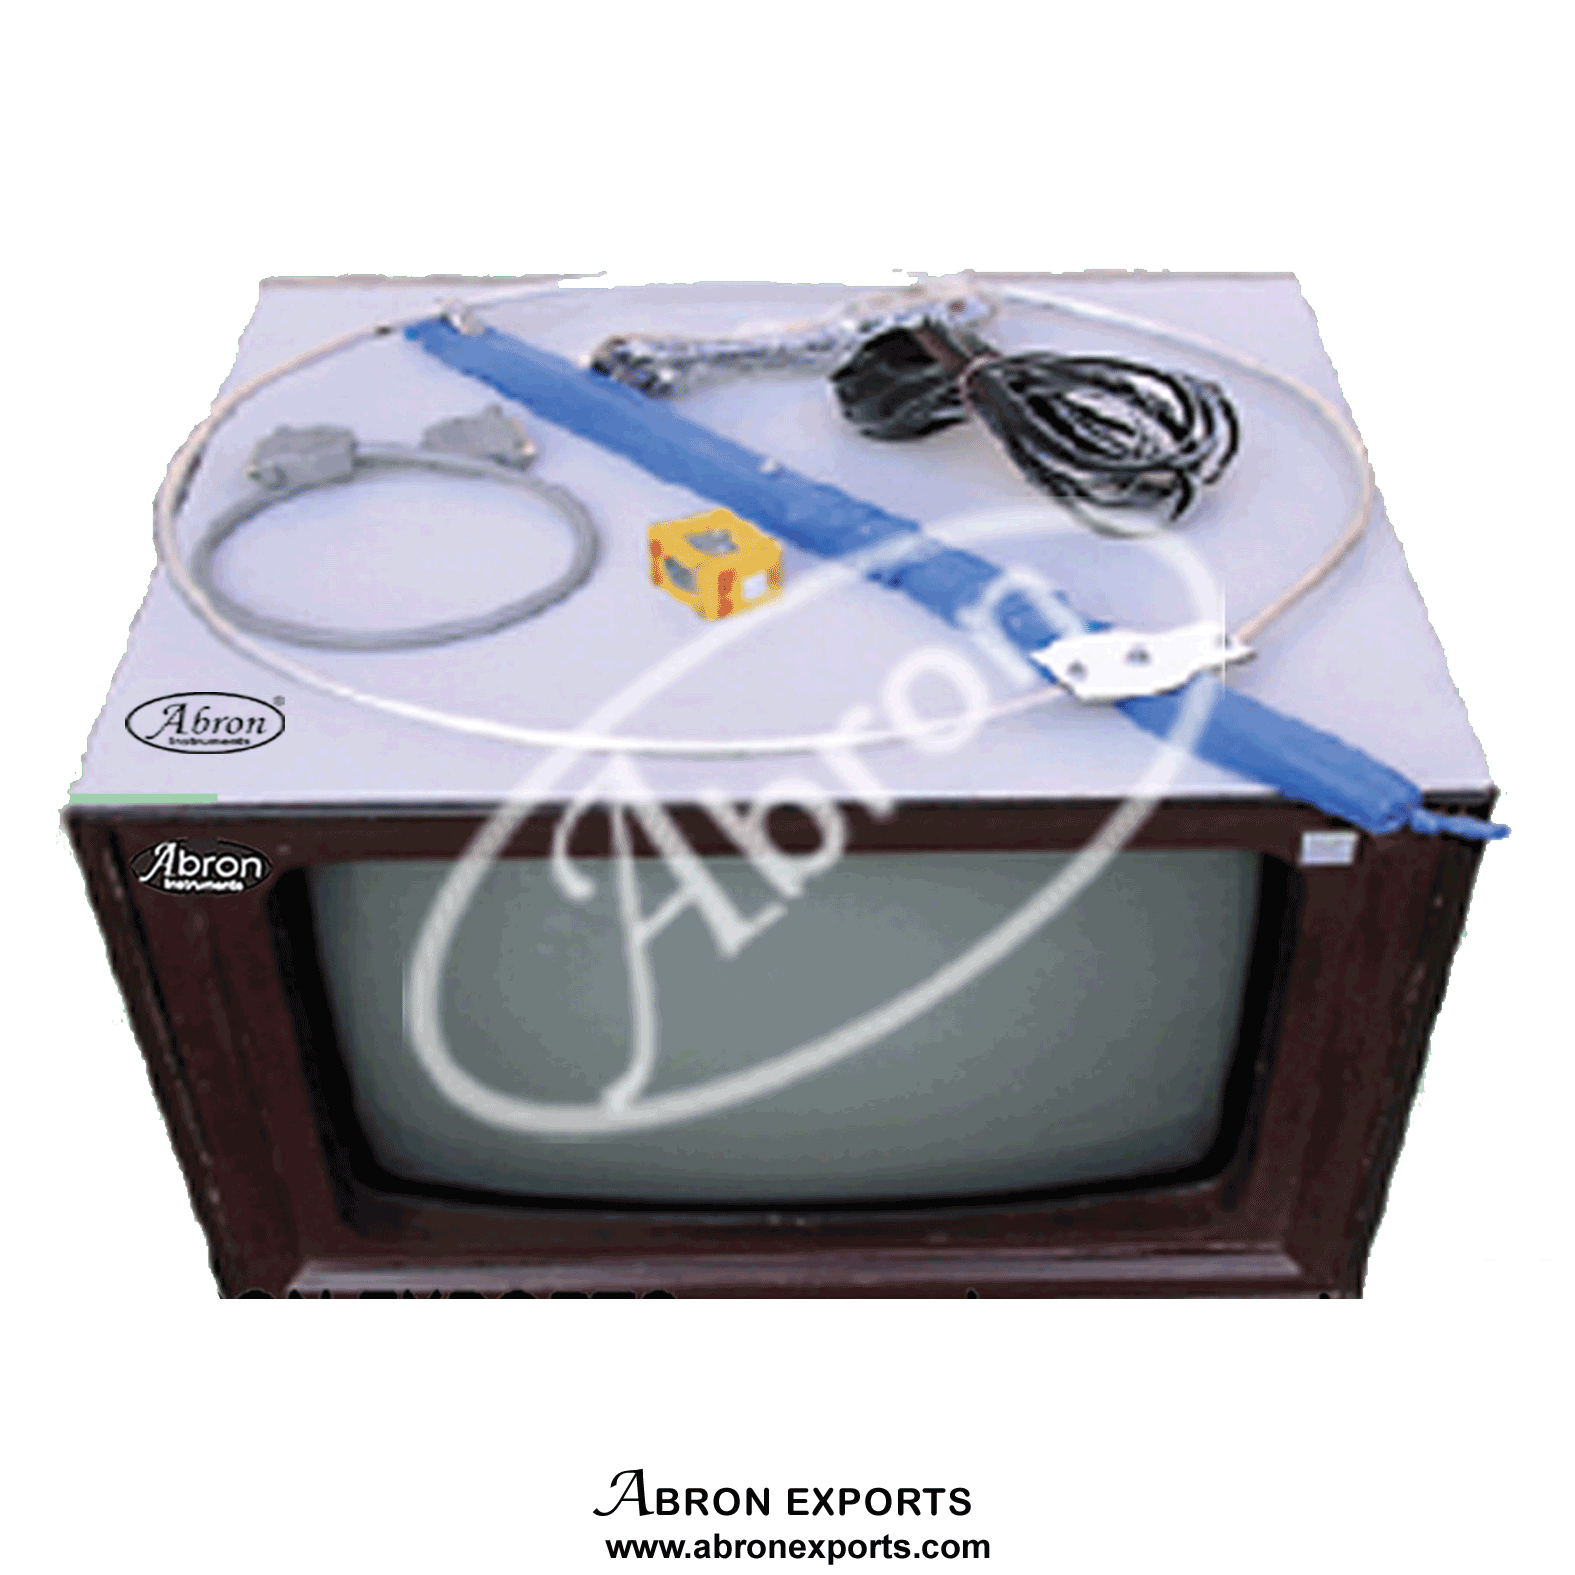 Demonstration T.V. black/white with test points set up Abron AE-1241  